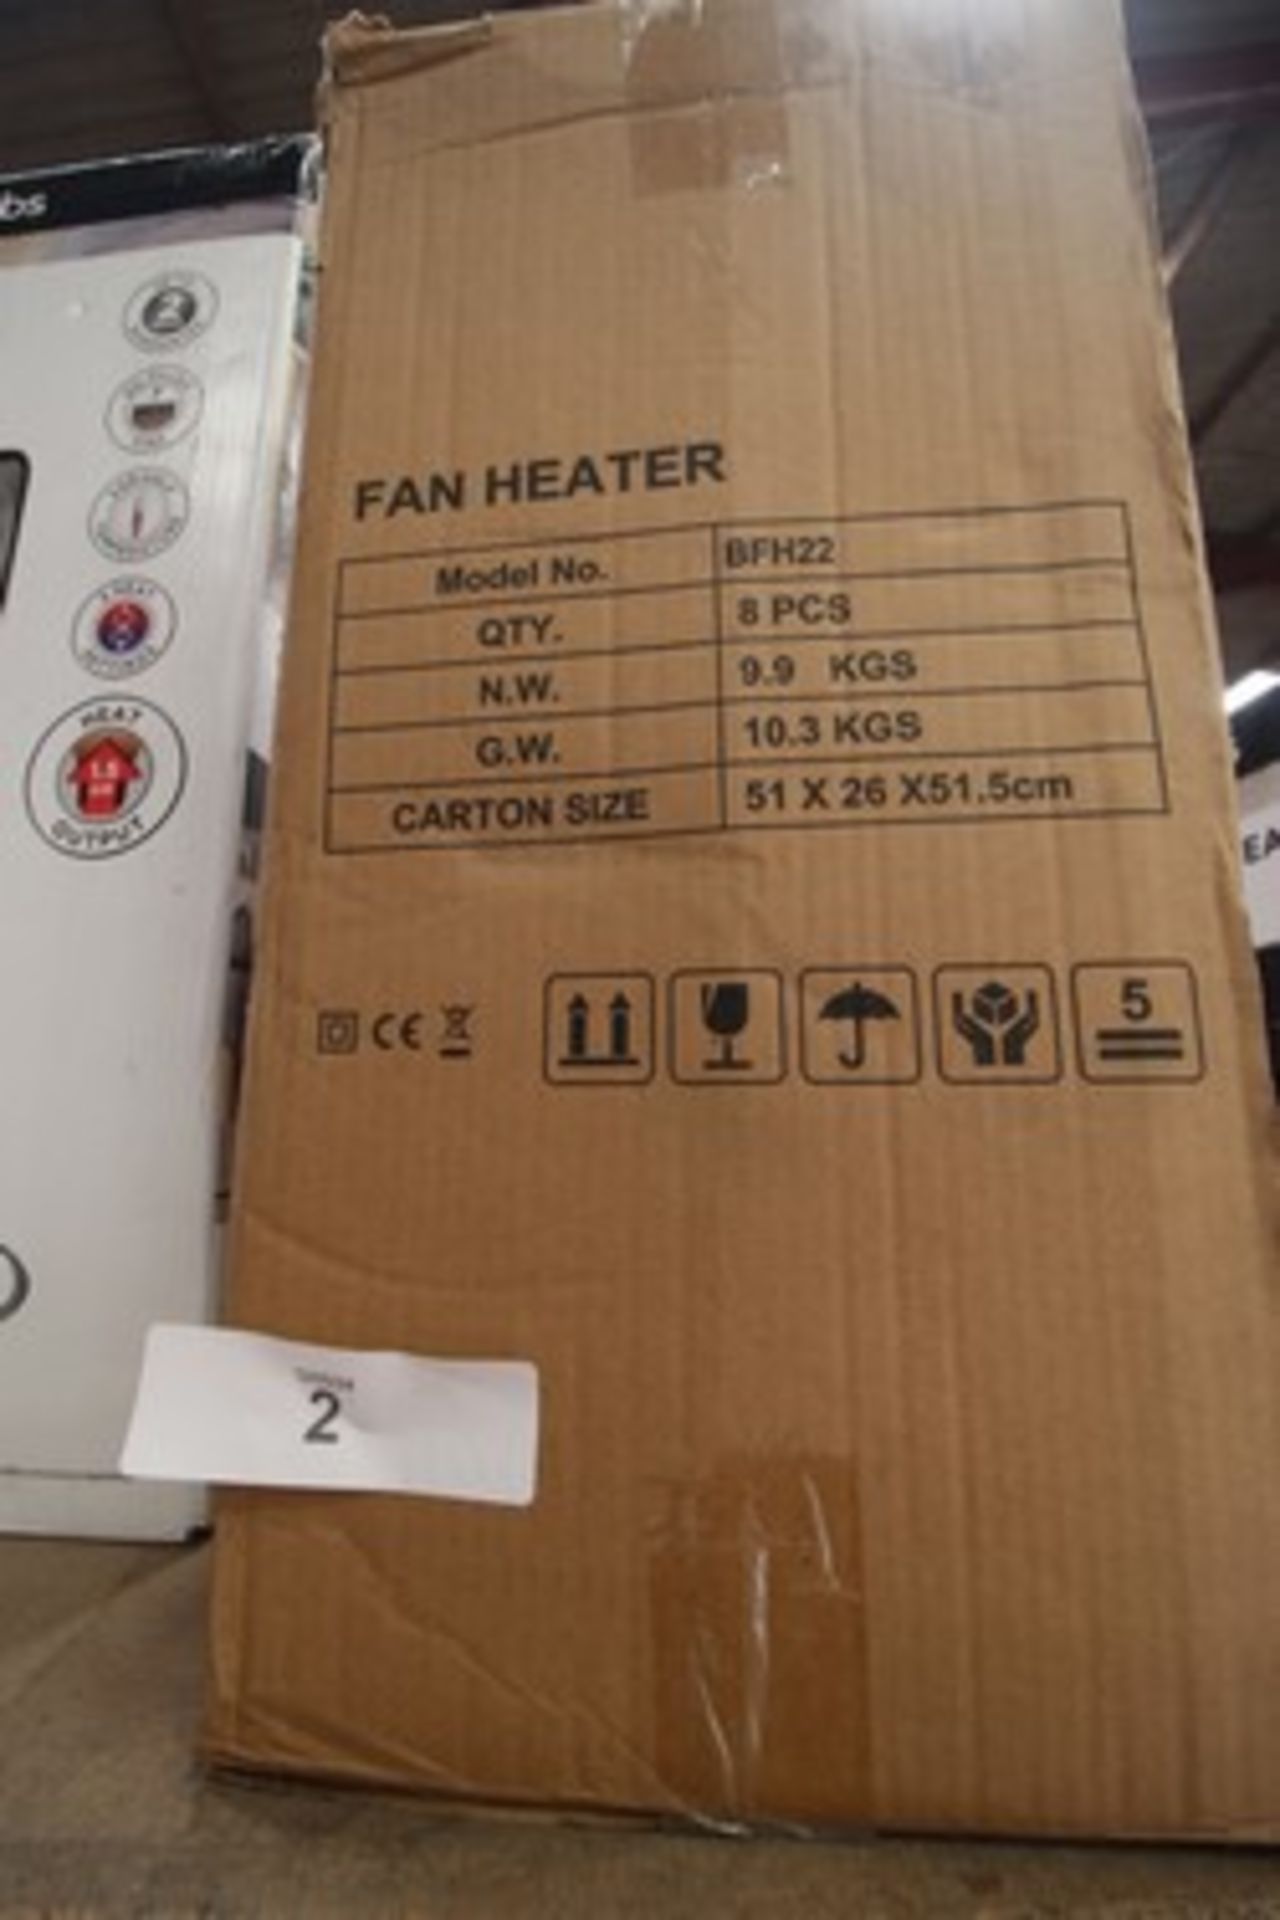 A selection of heaters, including Russell Hobbs 7 fin oil filled heaters and 8 x Belaco fan heaters, - Image 2 of 2